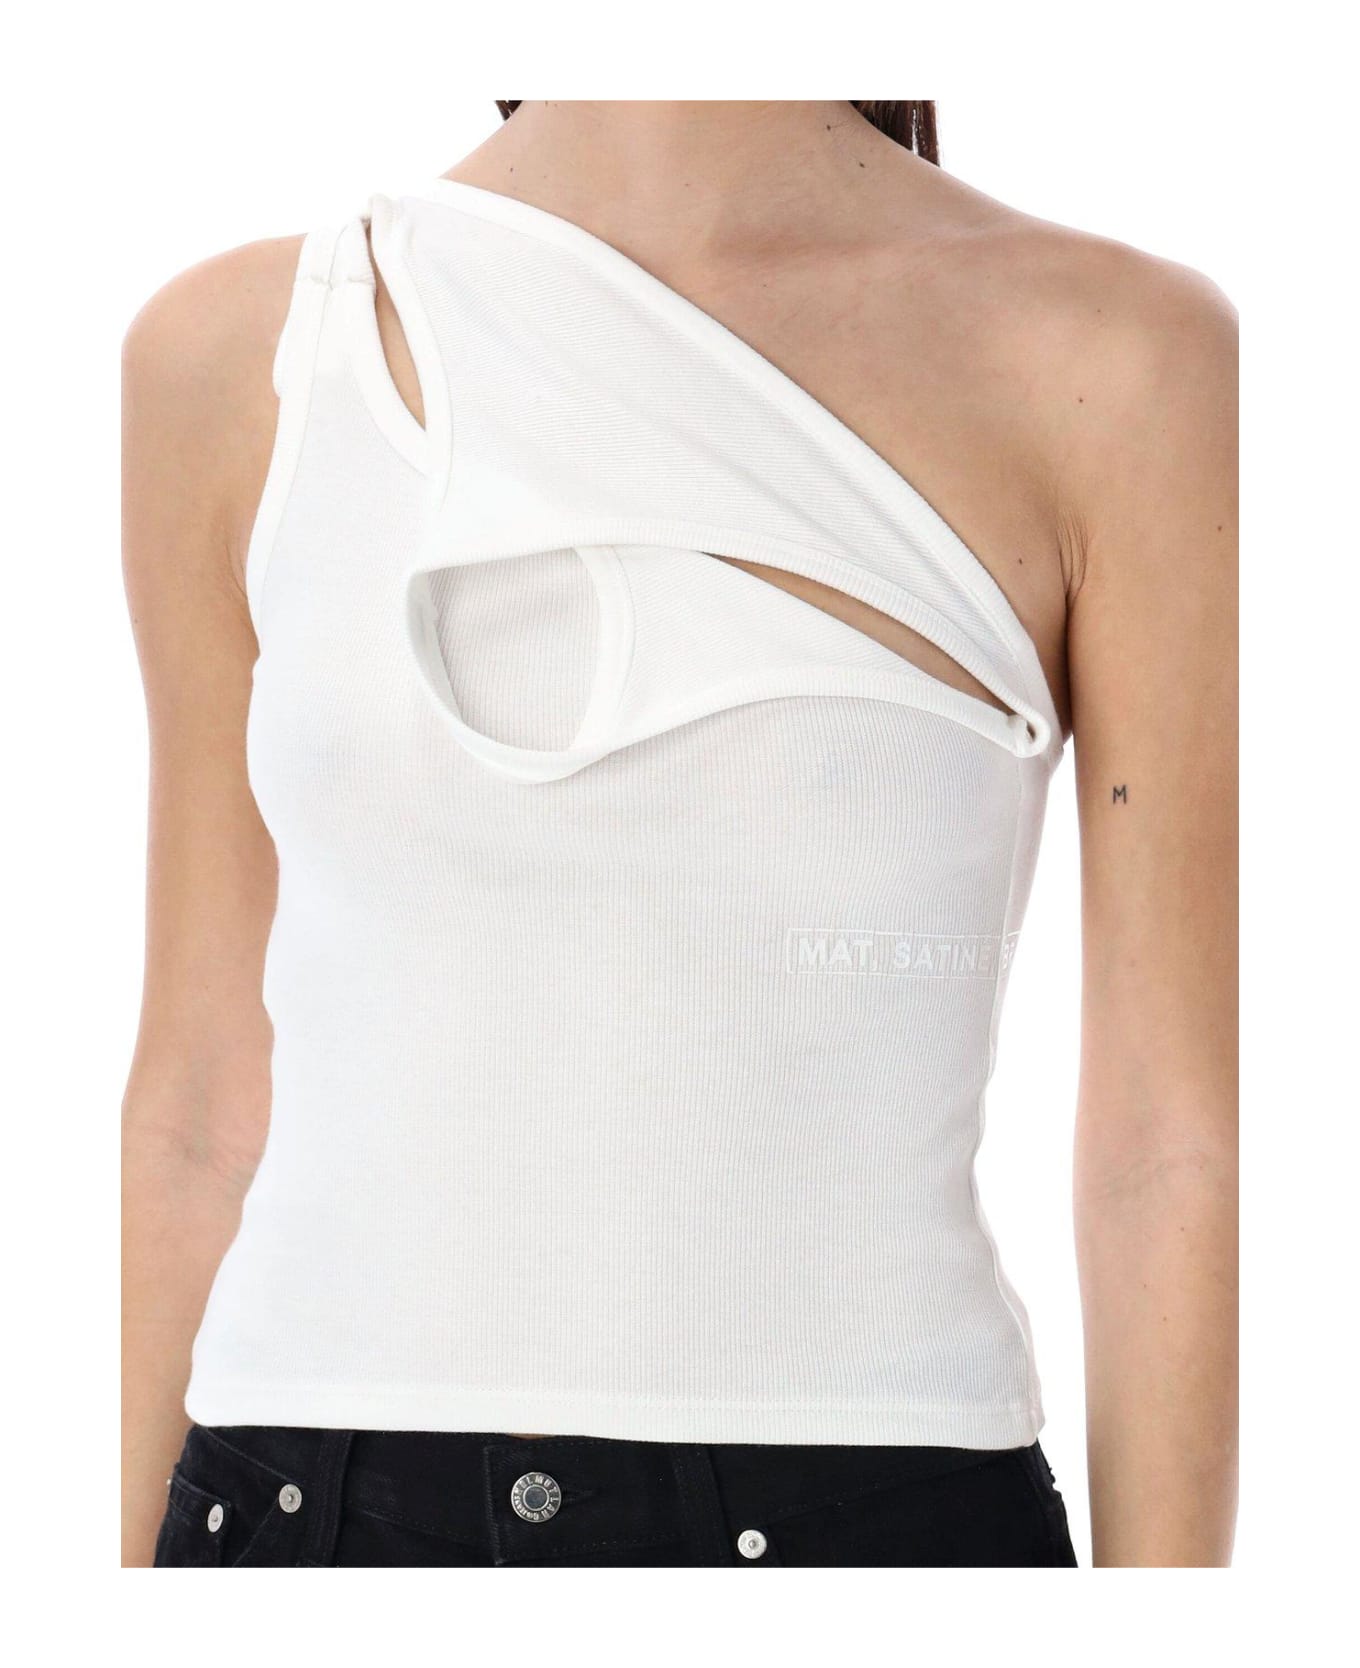 MM6 Maison Margiela Cut-out Detailed Ribbed Tank Top - WHITE (White)